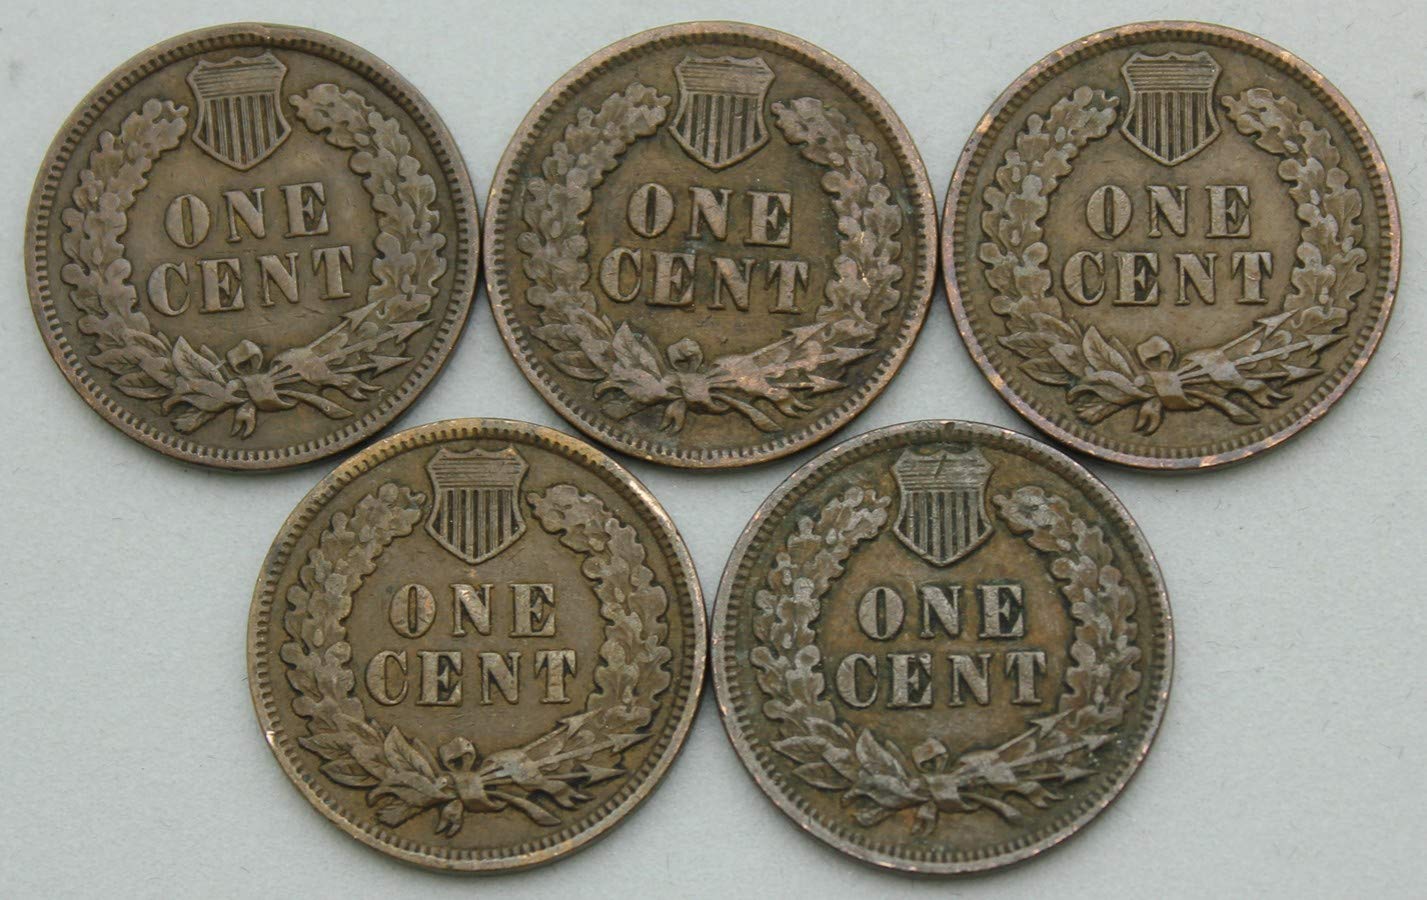 Vintage Indian Head Cents Collection: 100+ Year Old Pennies Estate Sale”